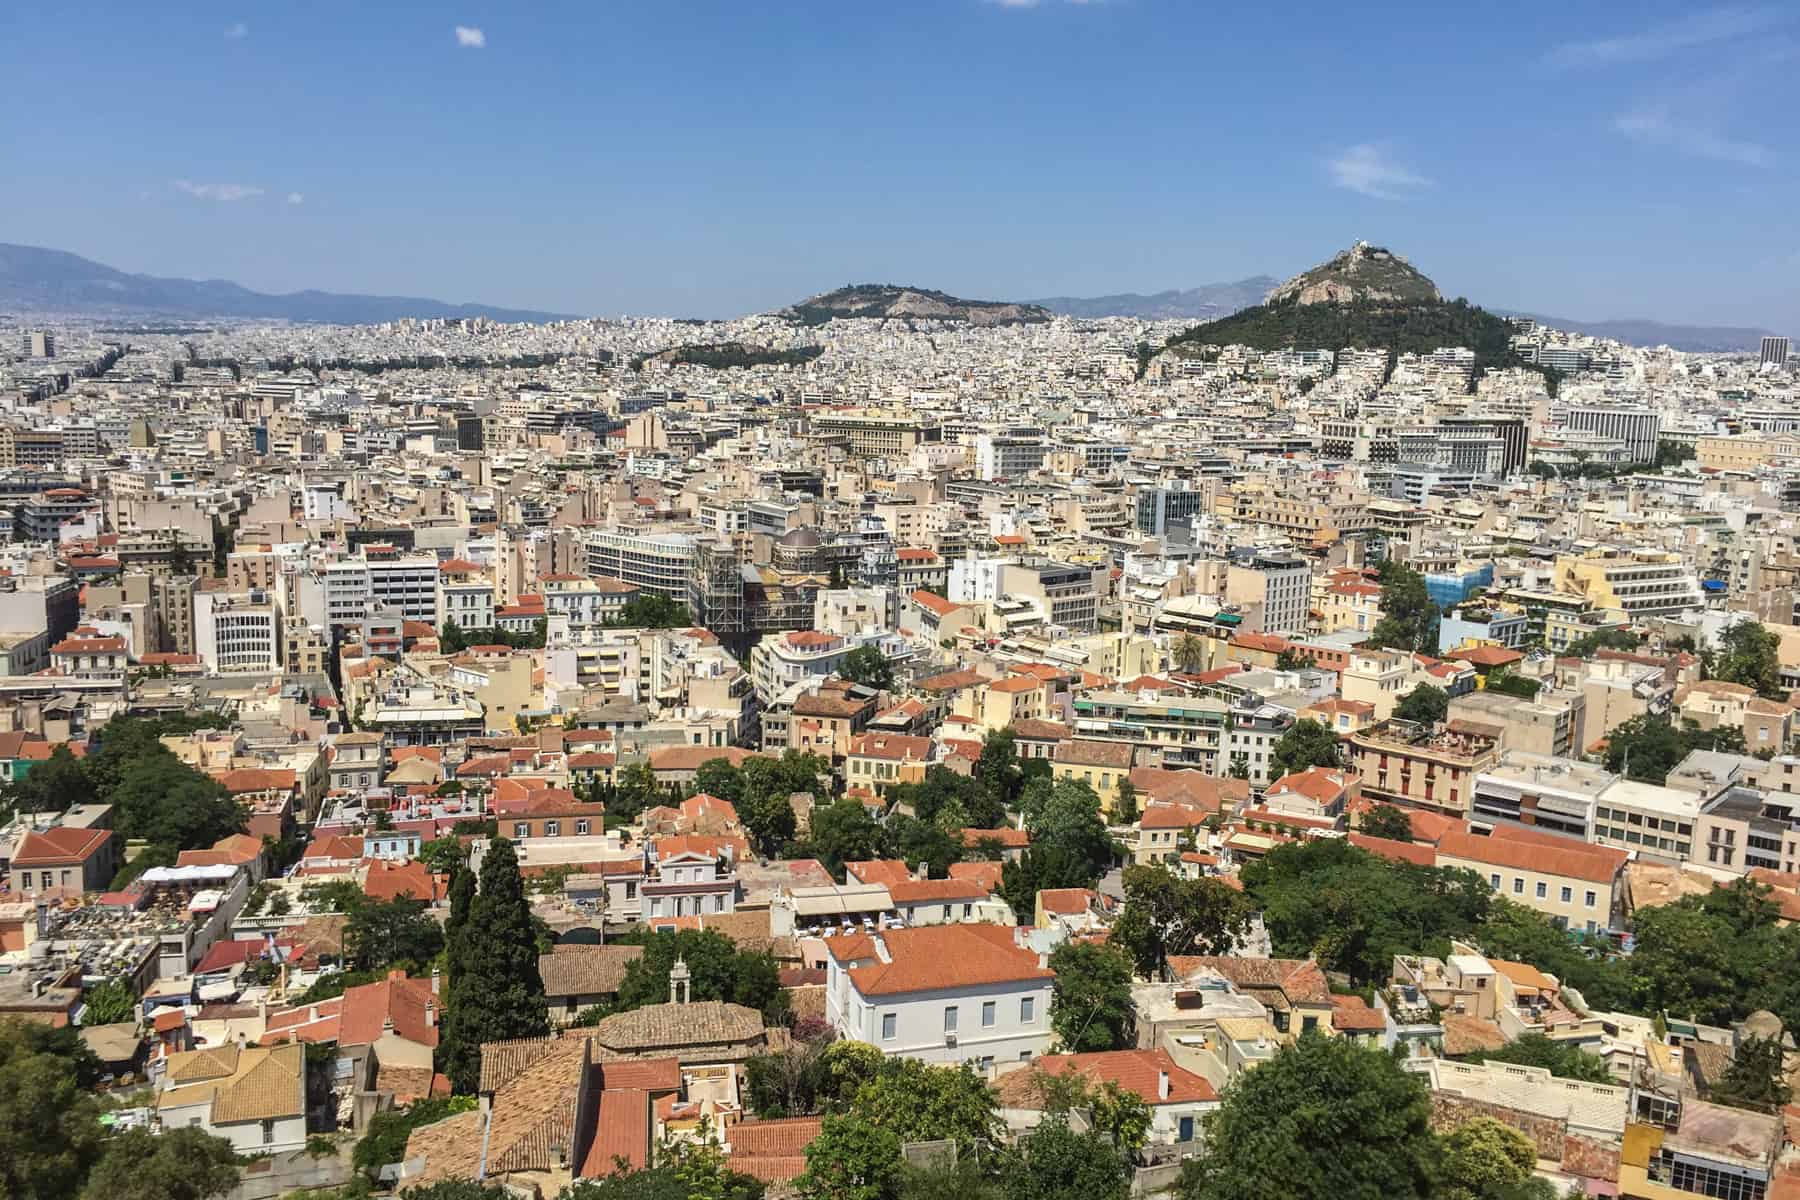 Compacted Athens city structures as seen from elevation, with two small green hills poking through in the background.